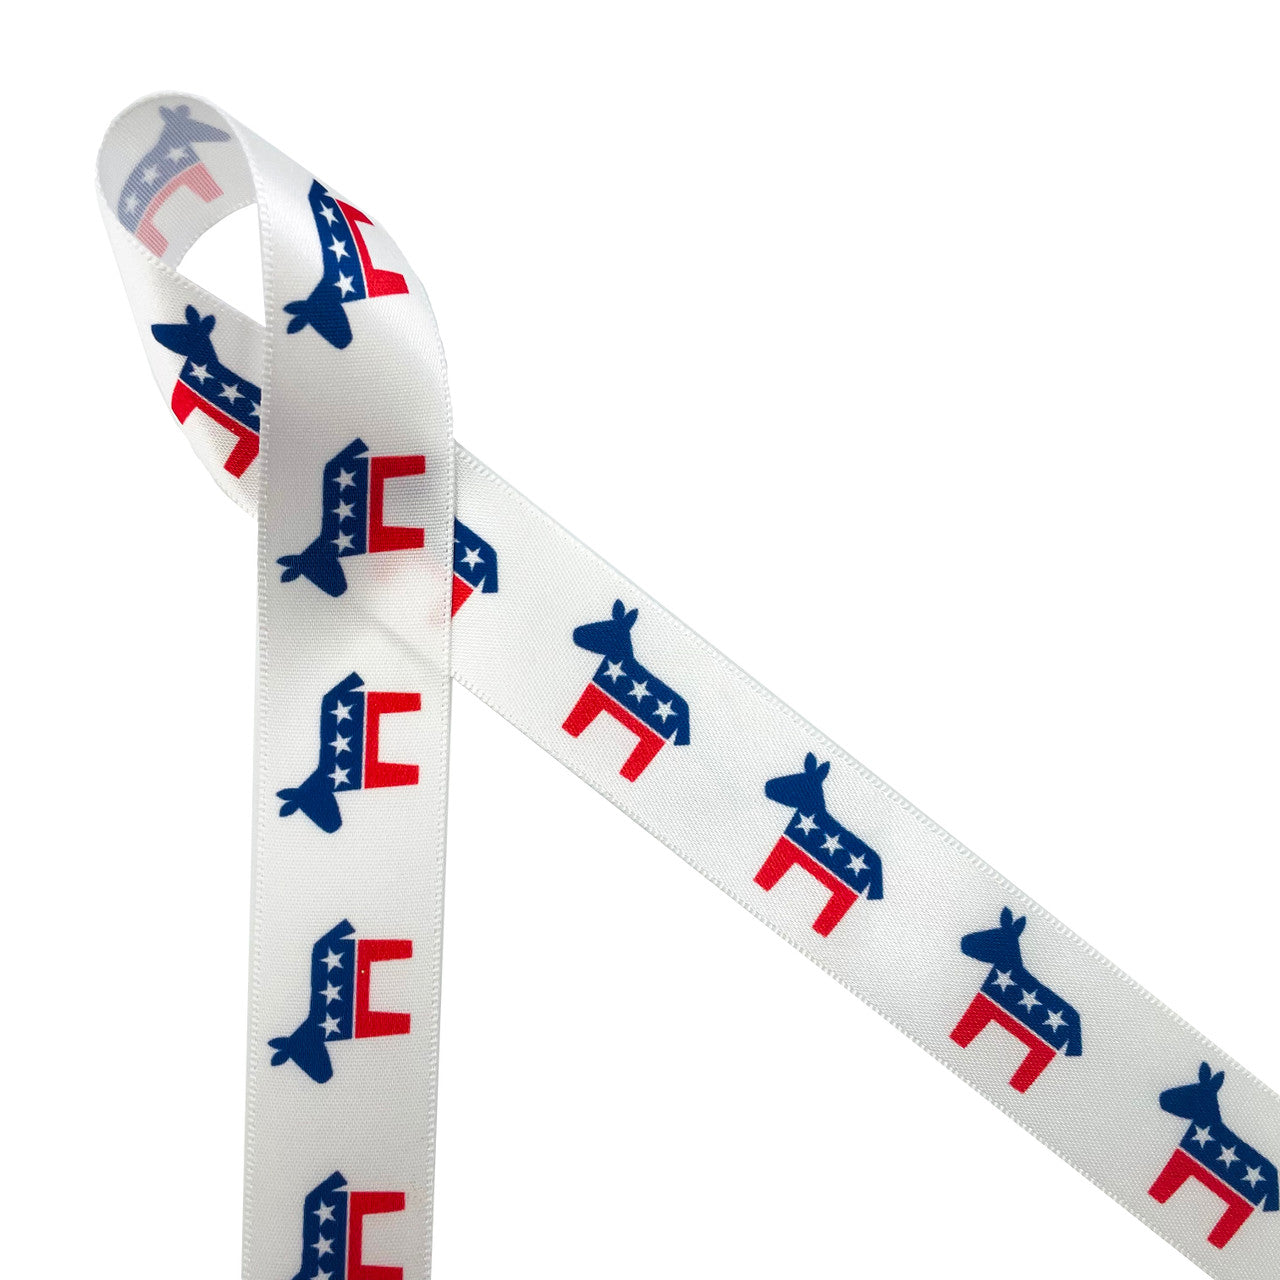 Democratic Donkey ribbon in red and blue with stars printed on 7/8" white single face satin is the ideal ribbon for election season events. This ribbon is perfect for Democratic fundraisers, rallies, conventions and parties. Use this ribbon for lapel pins, gift wrap, gift baskets, table decor, floral design, crafts, sewing and quilting projects. This ribbon is great for hair bows, head bands and fascinators too. All our ribbon is designed and printed in the USA